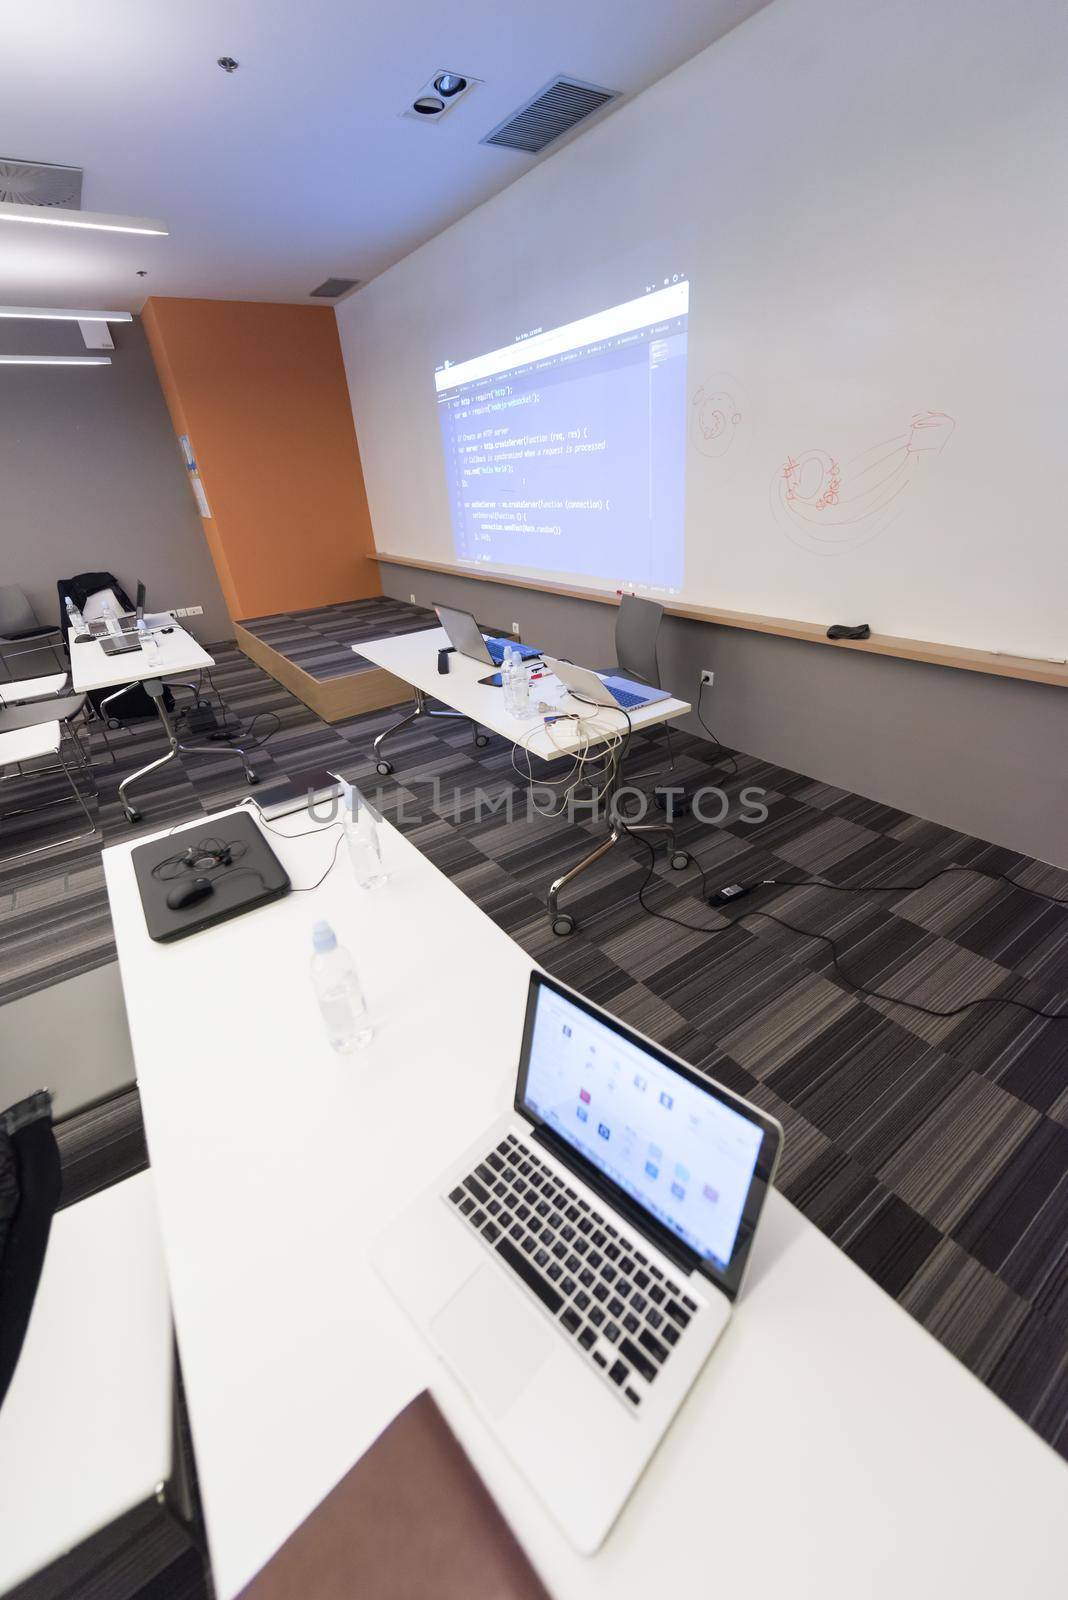 empty it classroom with program code on projector screen and modern laptop computers on table